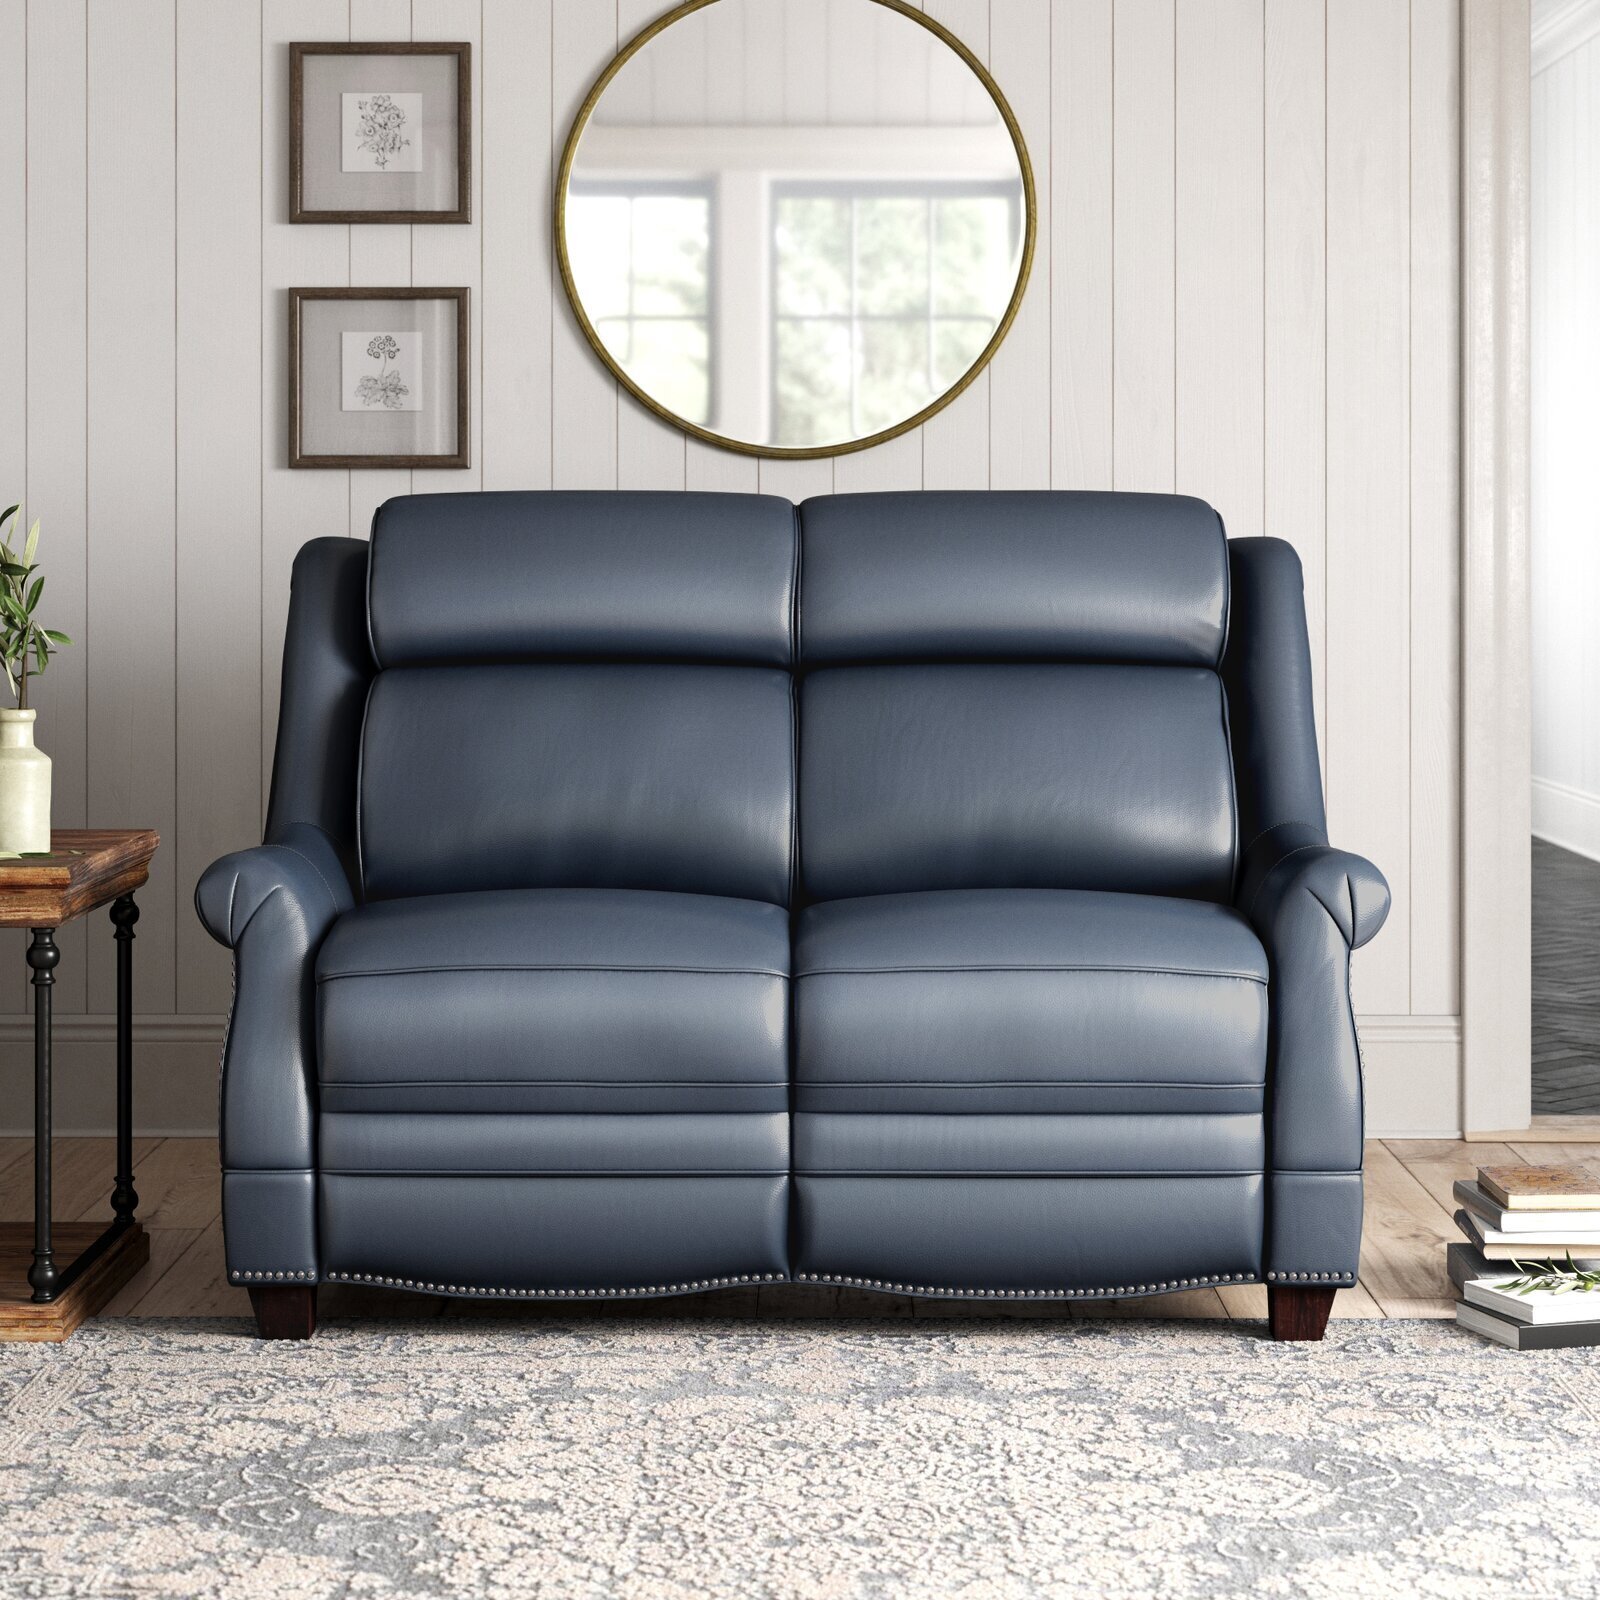 High back loveseat with reclining function